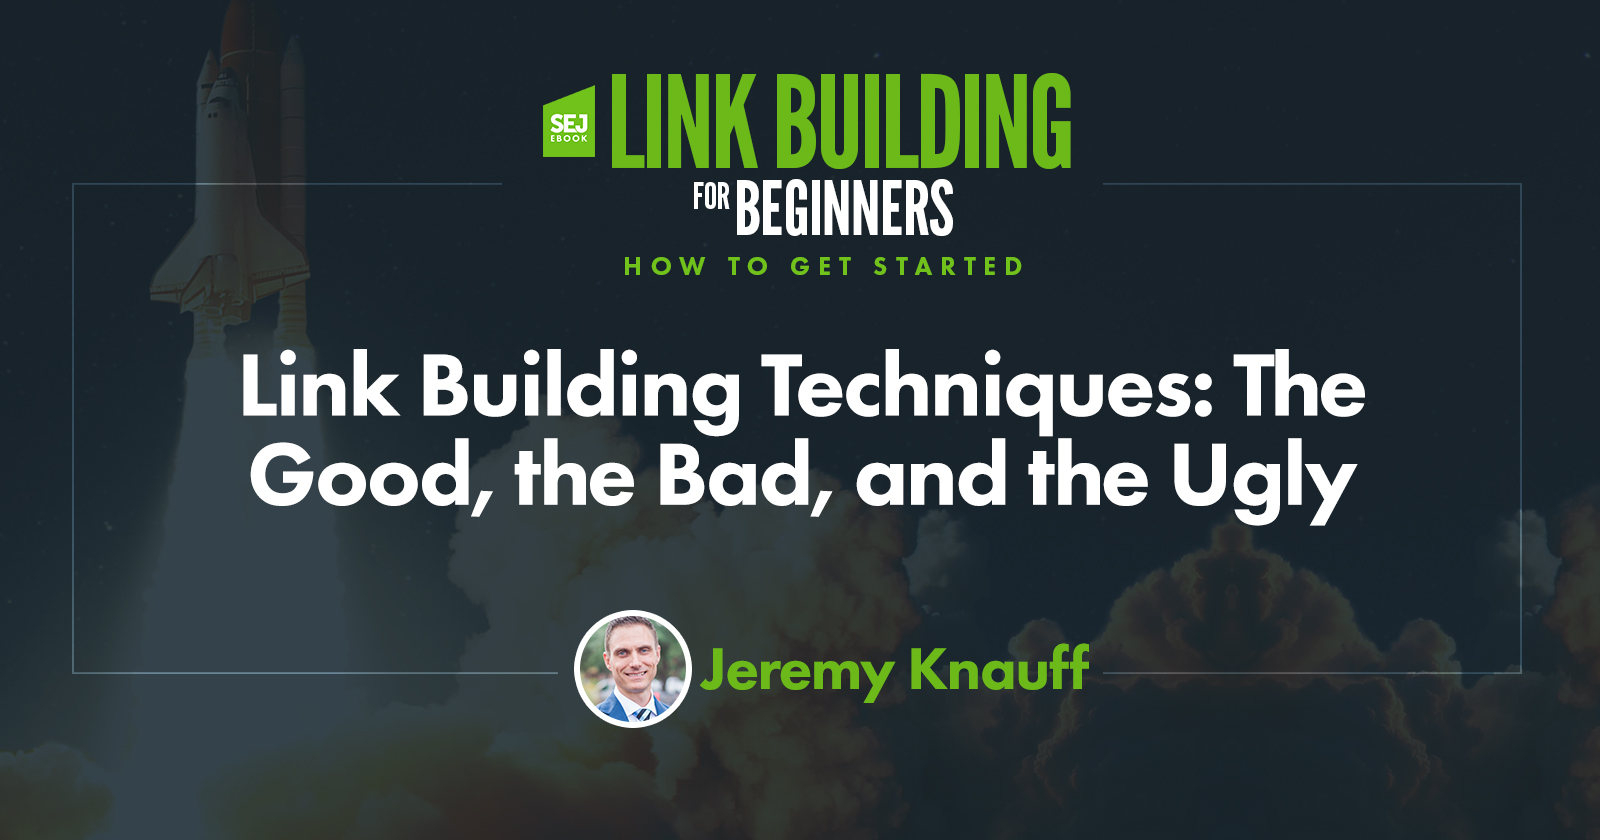 Link Building Techniques - The Good, the Bad, and the Ugly